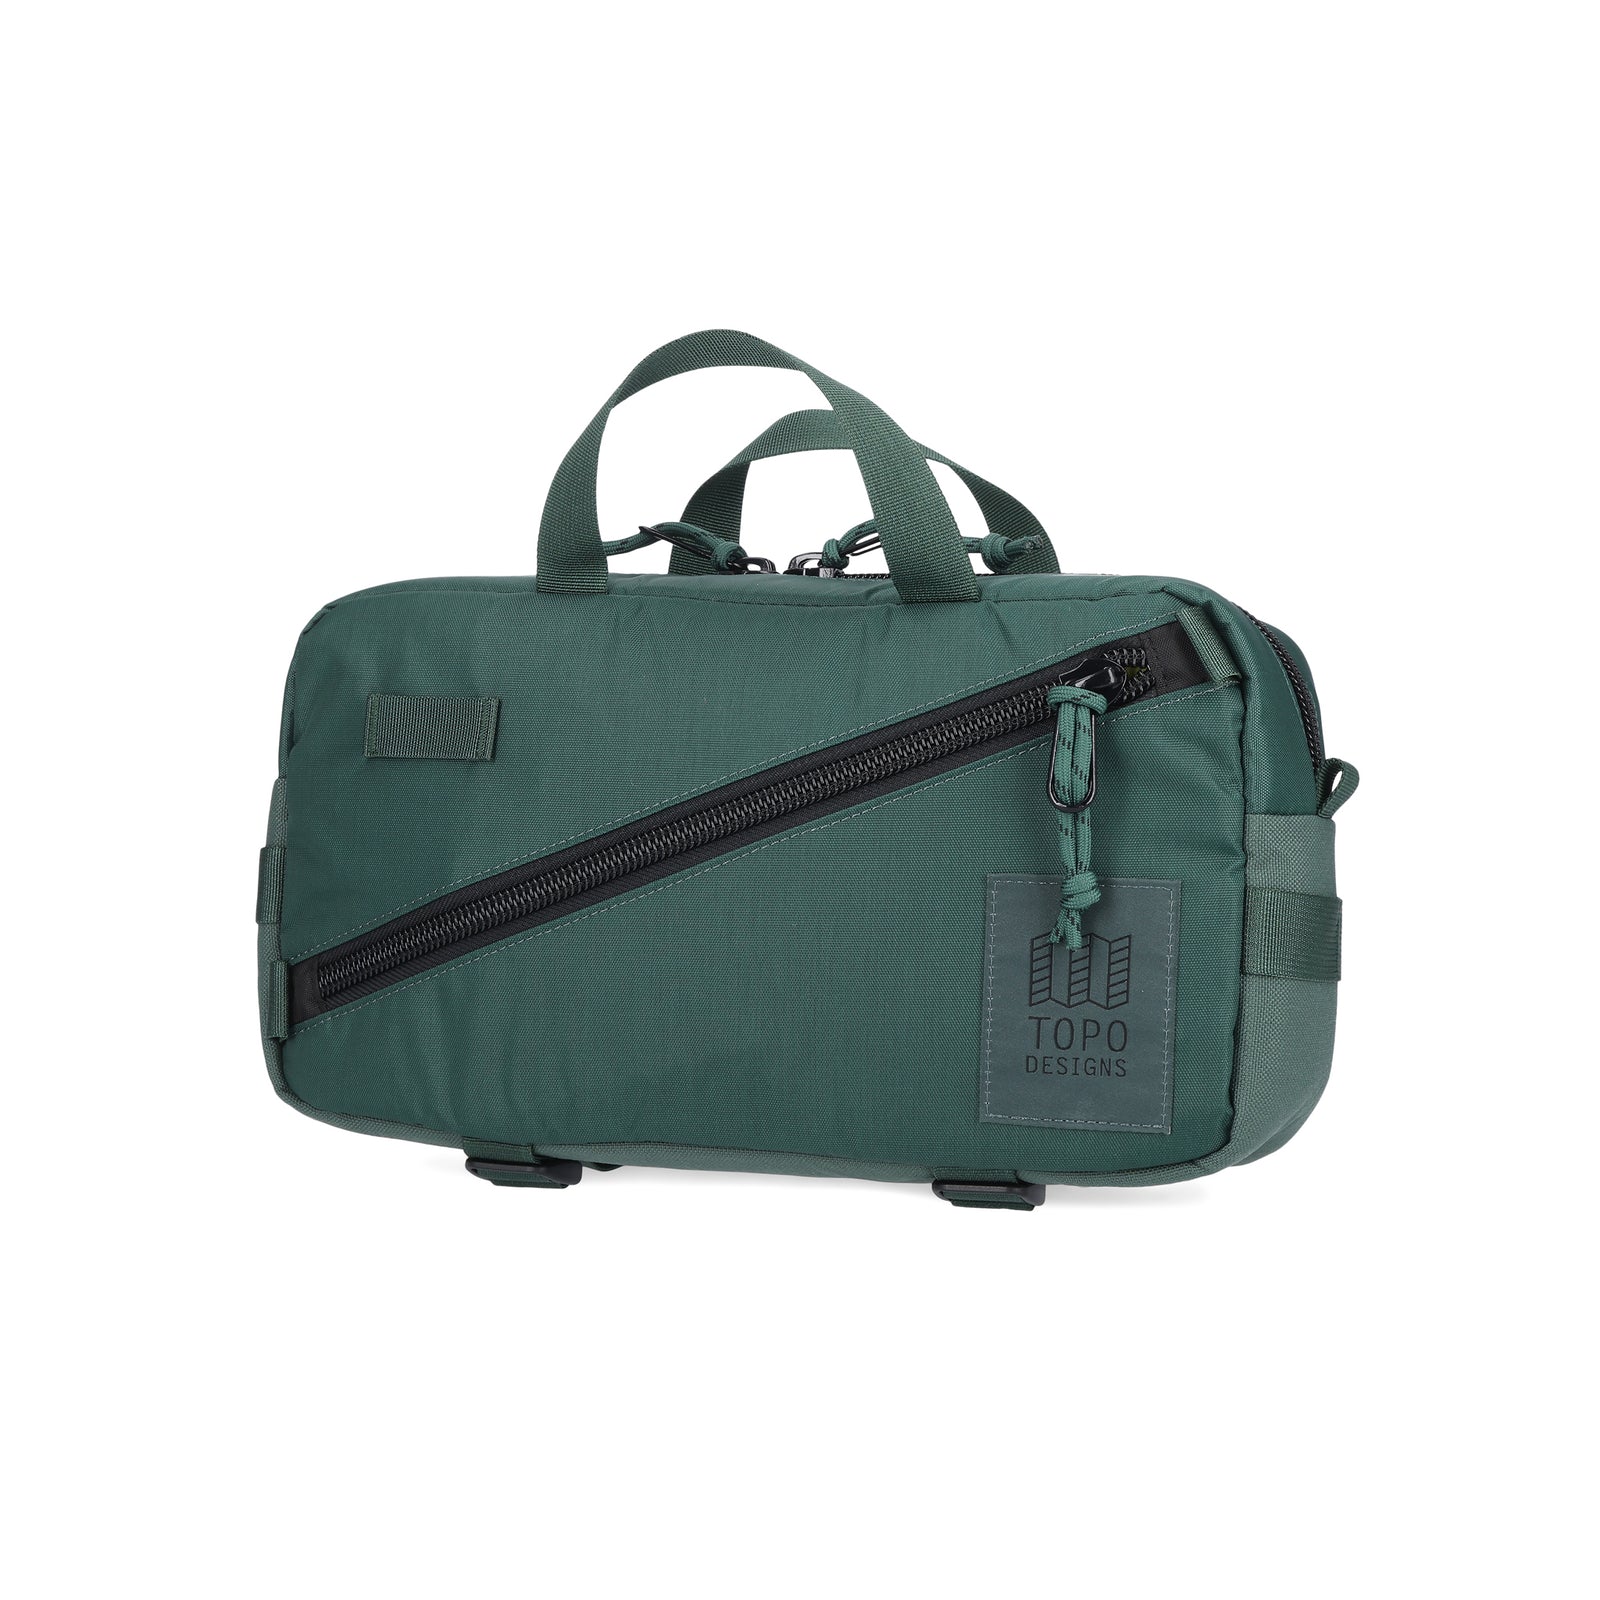 Topo Designs Quick Pack hip fanny pack in "Forest" green recycled nylon.